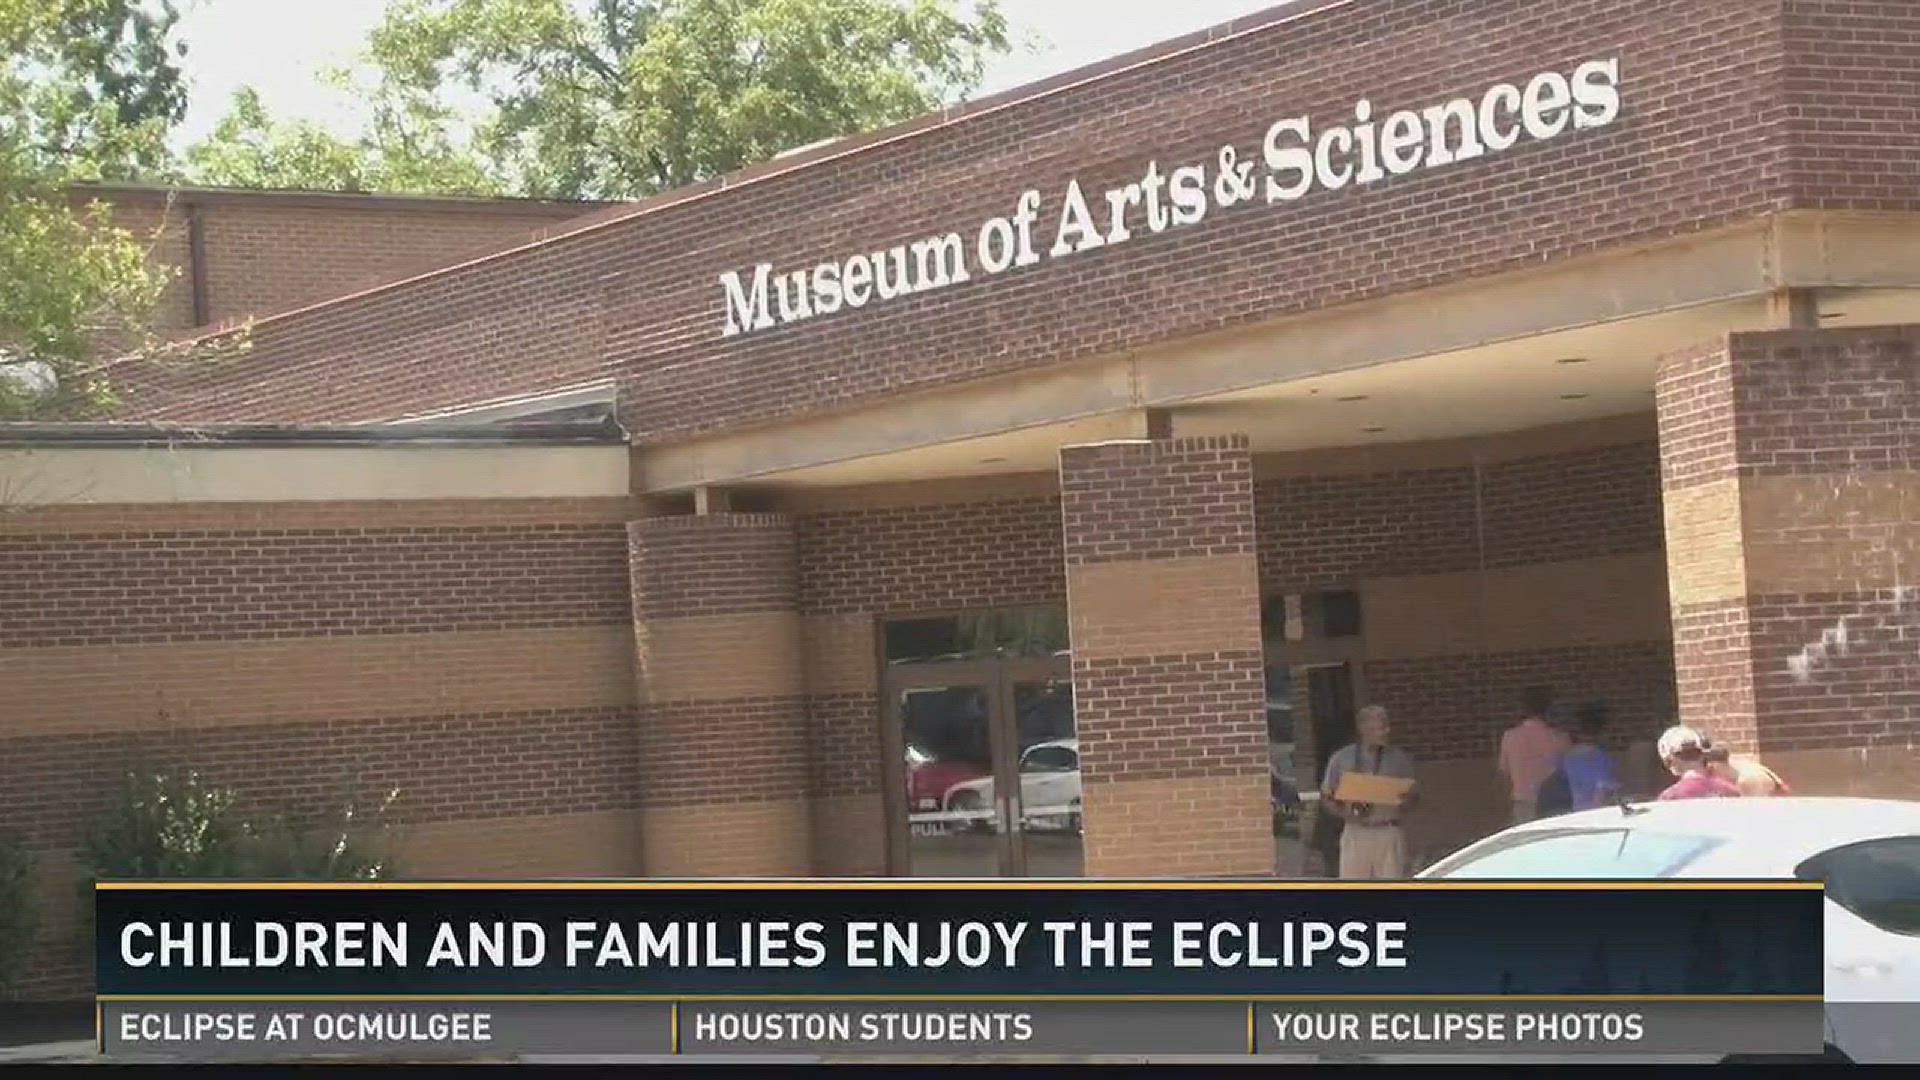 Families enjoy the eclipse at Museum of Arts and Sciences